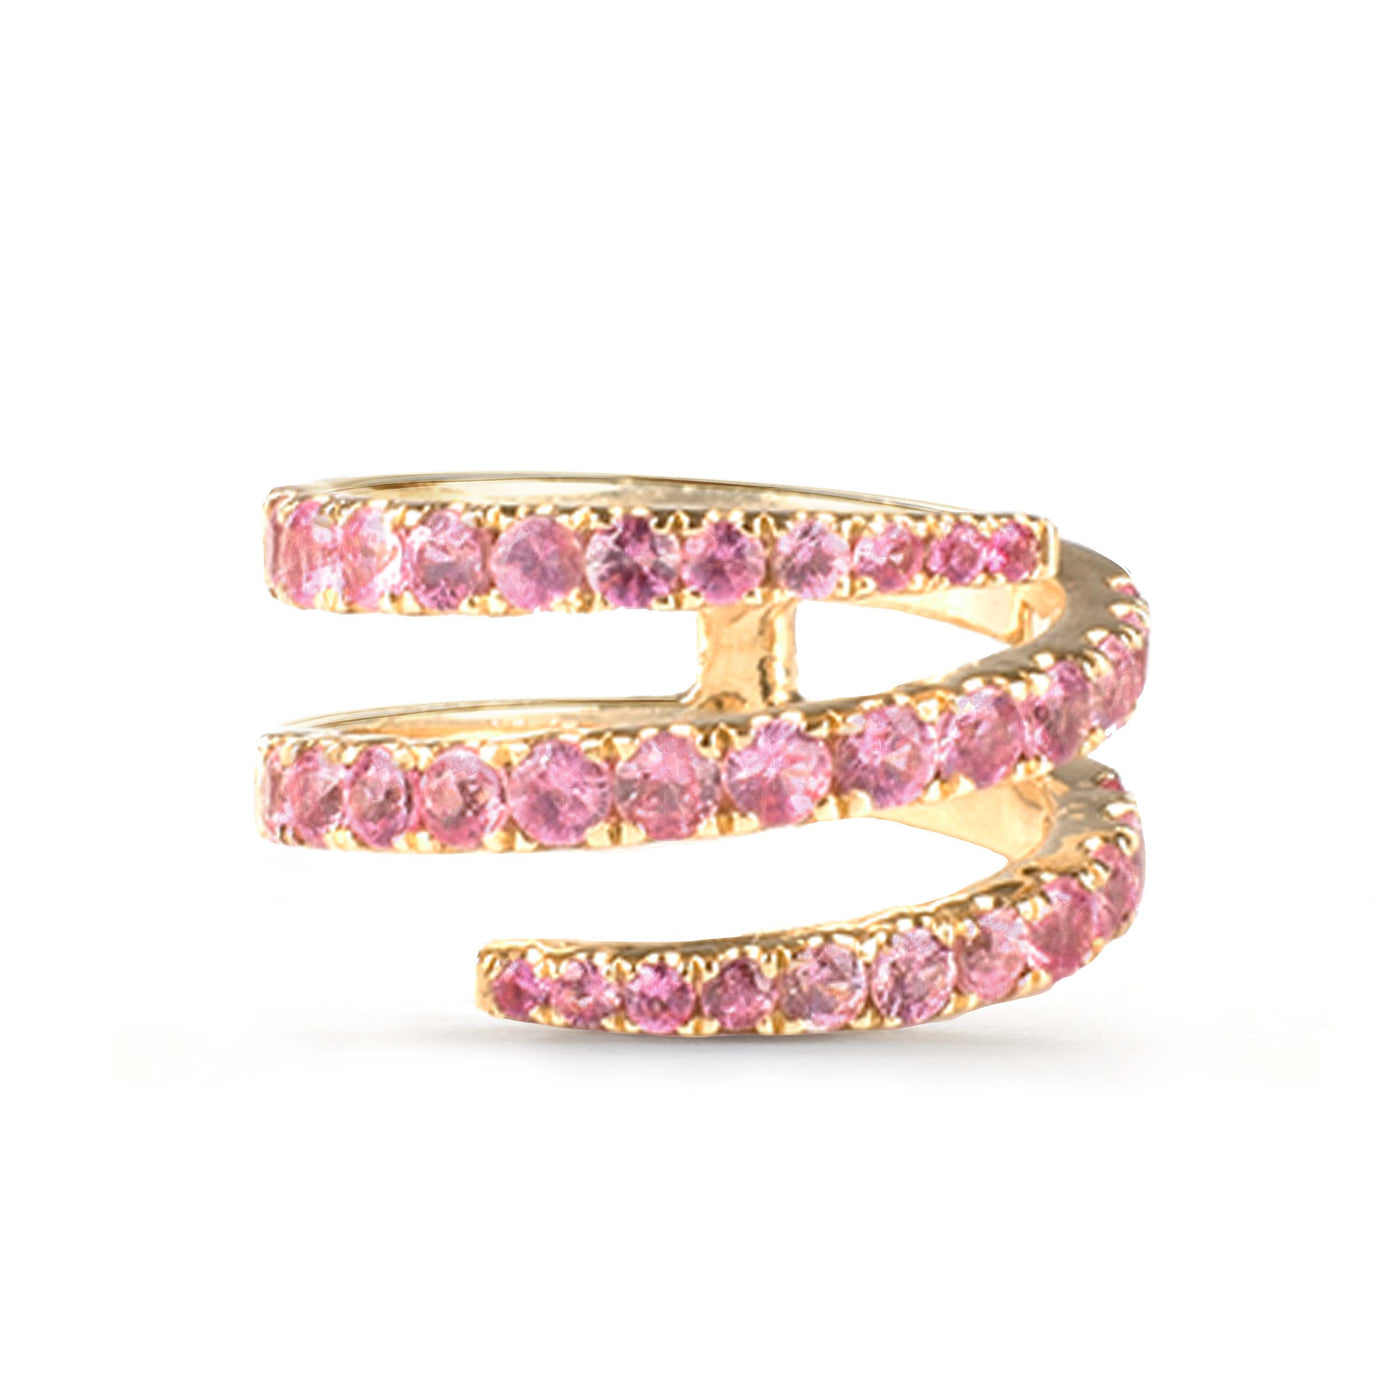 SHER Pink Saphire Spiral Ring